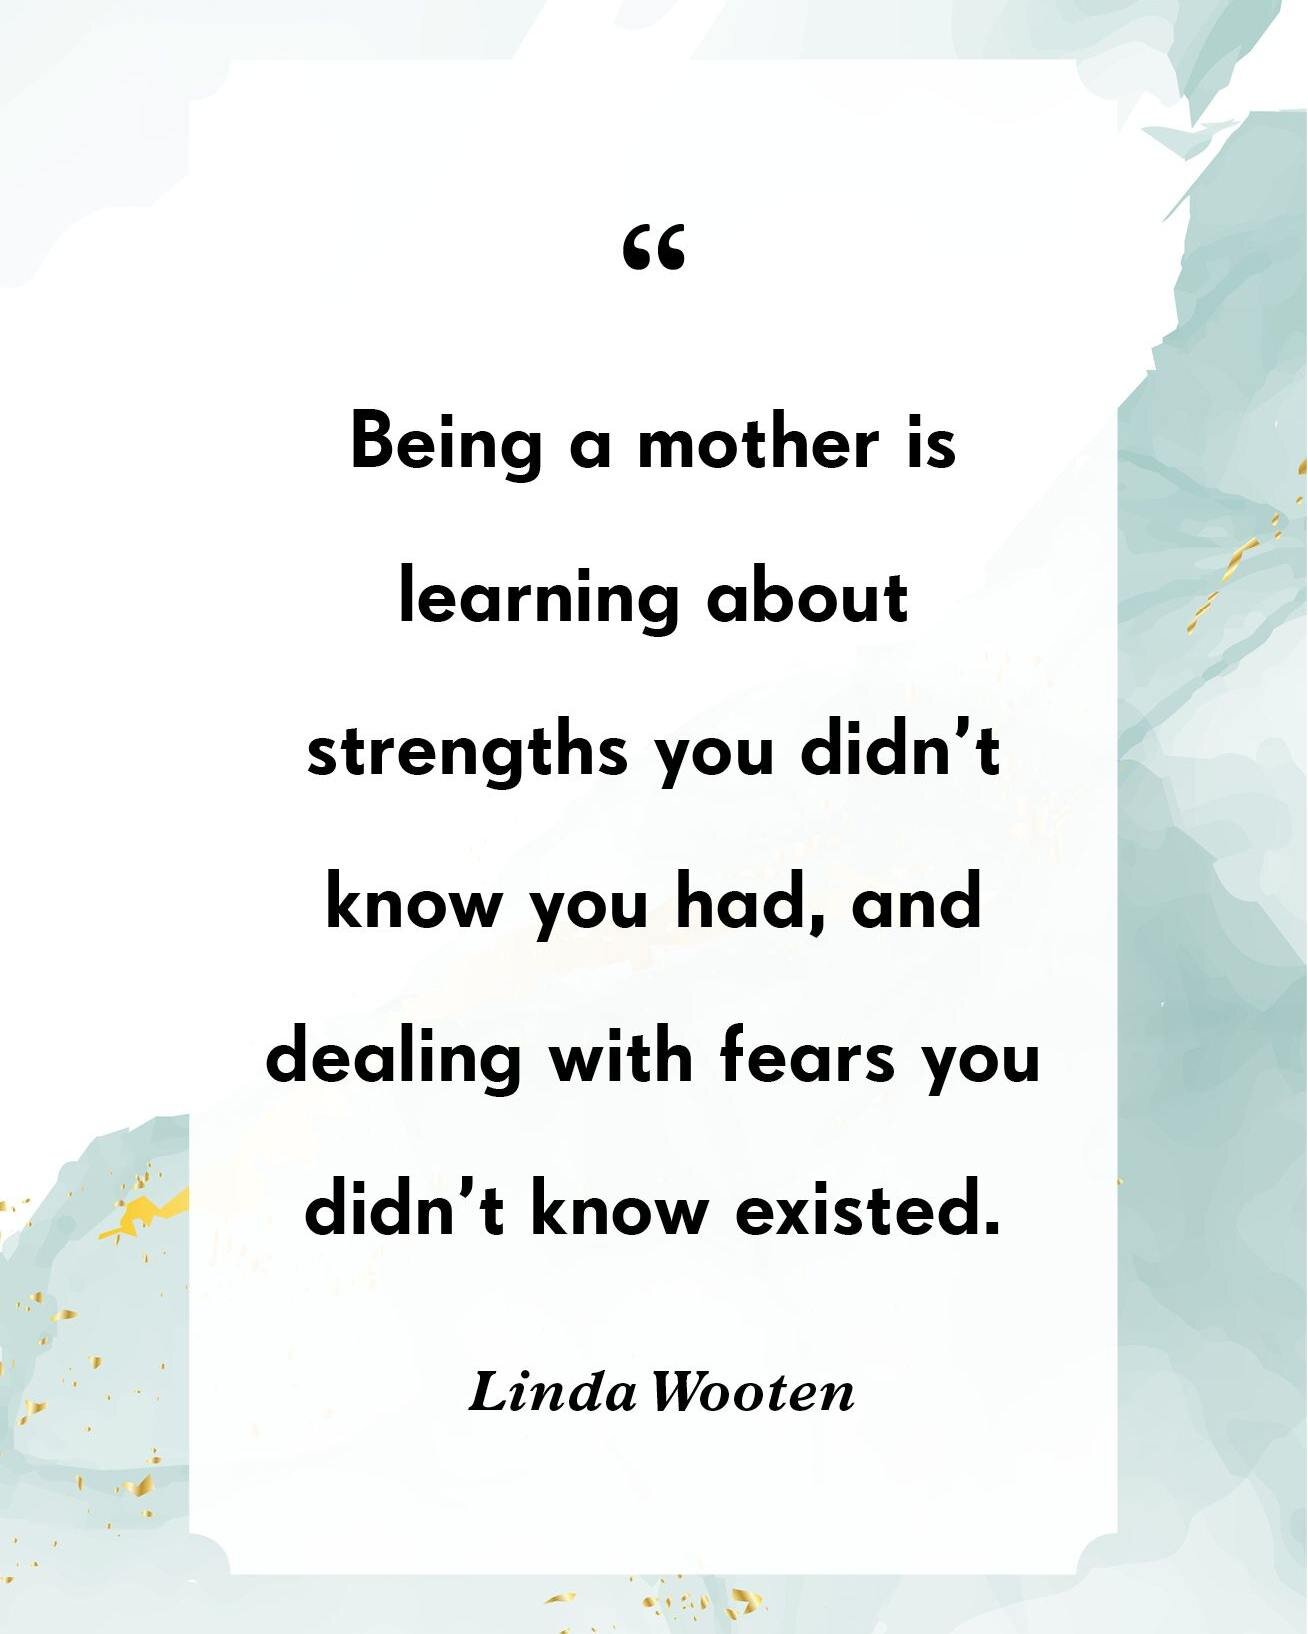 We are much stronger than we realize. Being a mother puts us in situations sometimes that we did not realize that we can handle. Sometimes we worry if we will be &quot;good enough&quot; to raise a child because we are afraid of failures or afraid of 